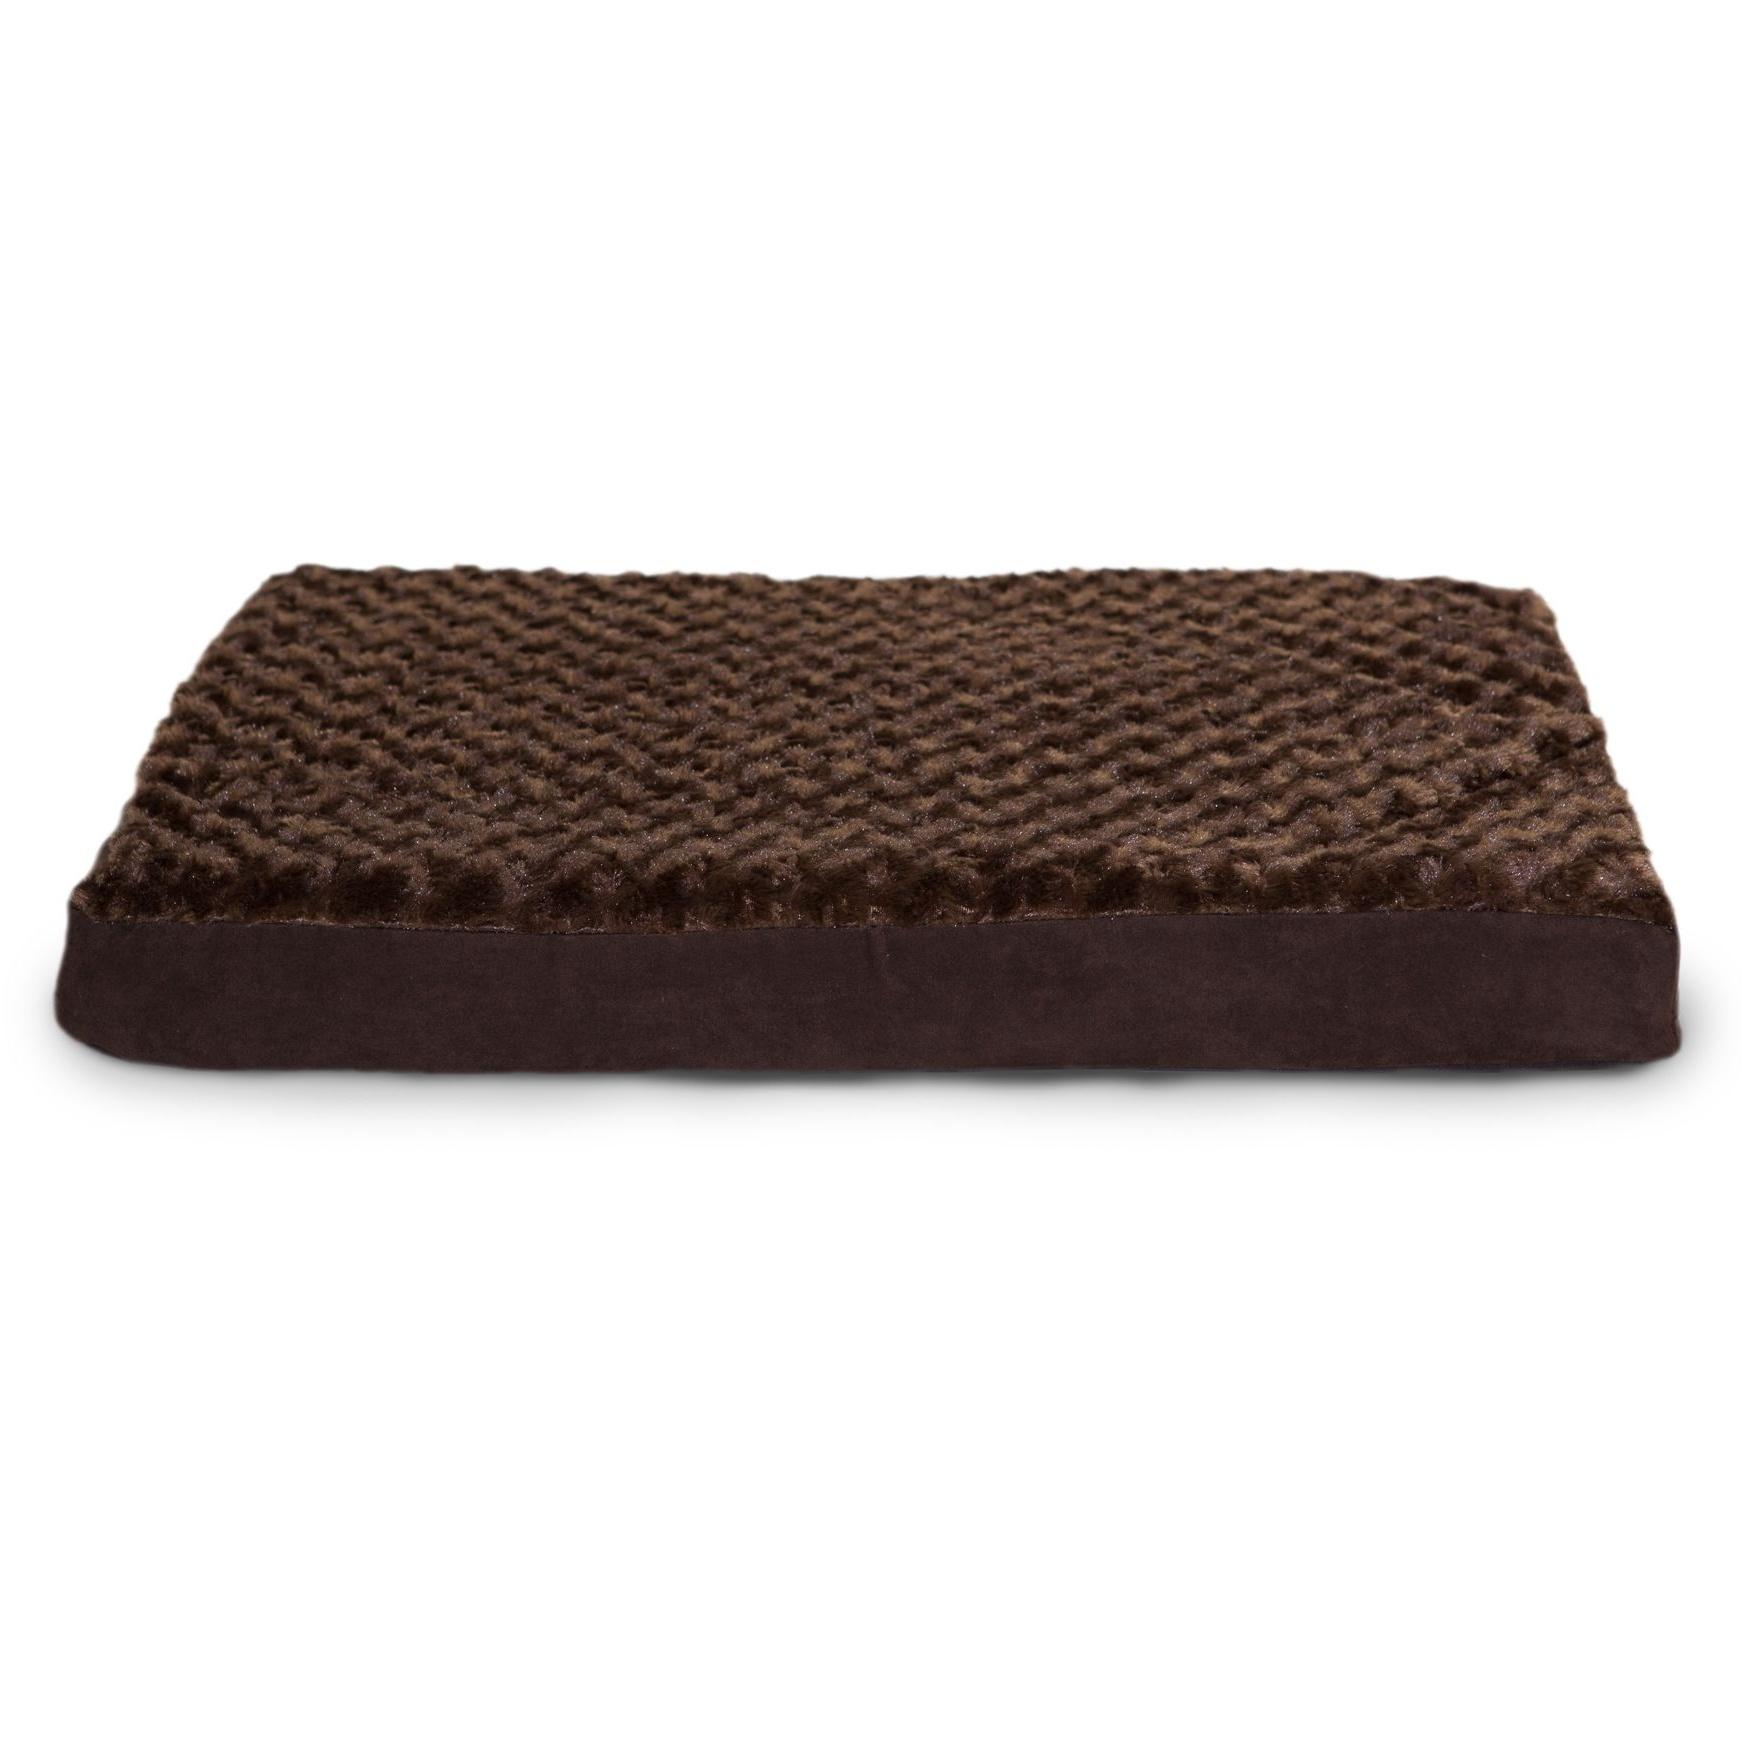 FurHaven Ultra Plush Deluxe Orthopedic Pet Bed - Chocolate